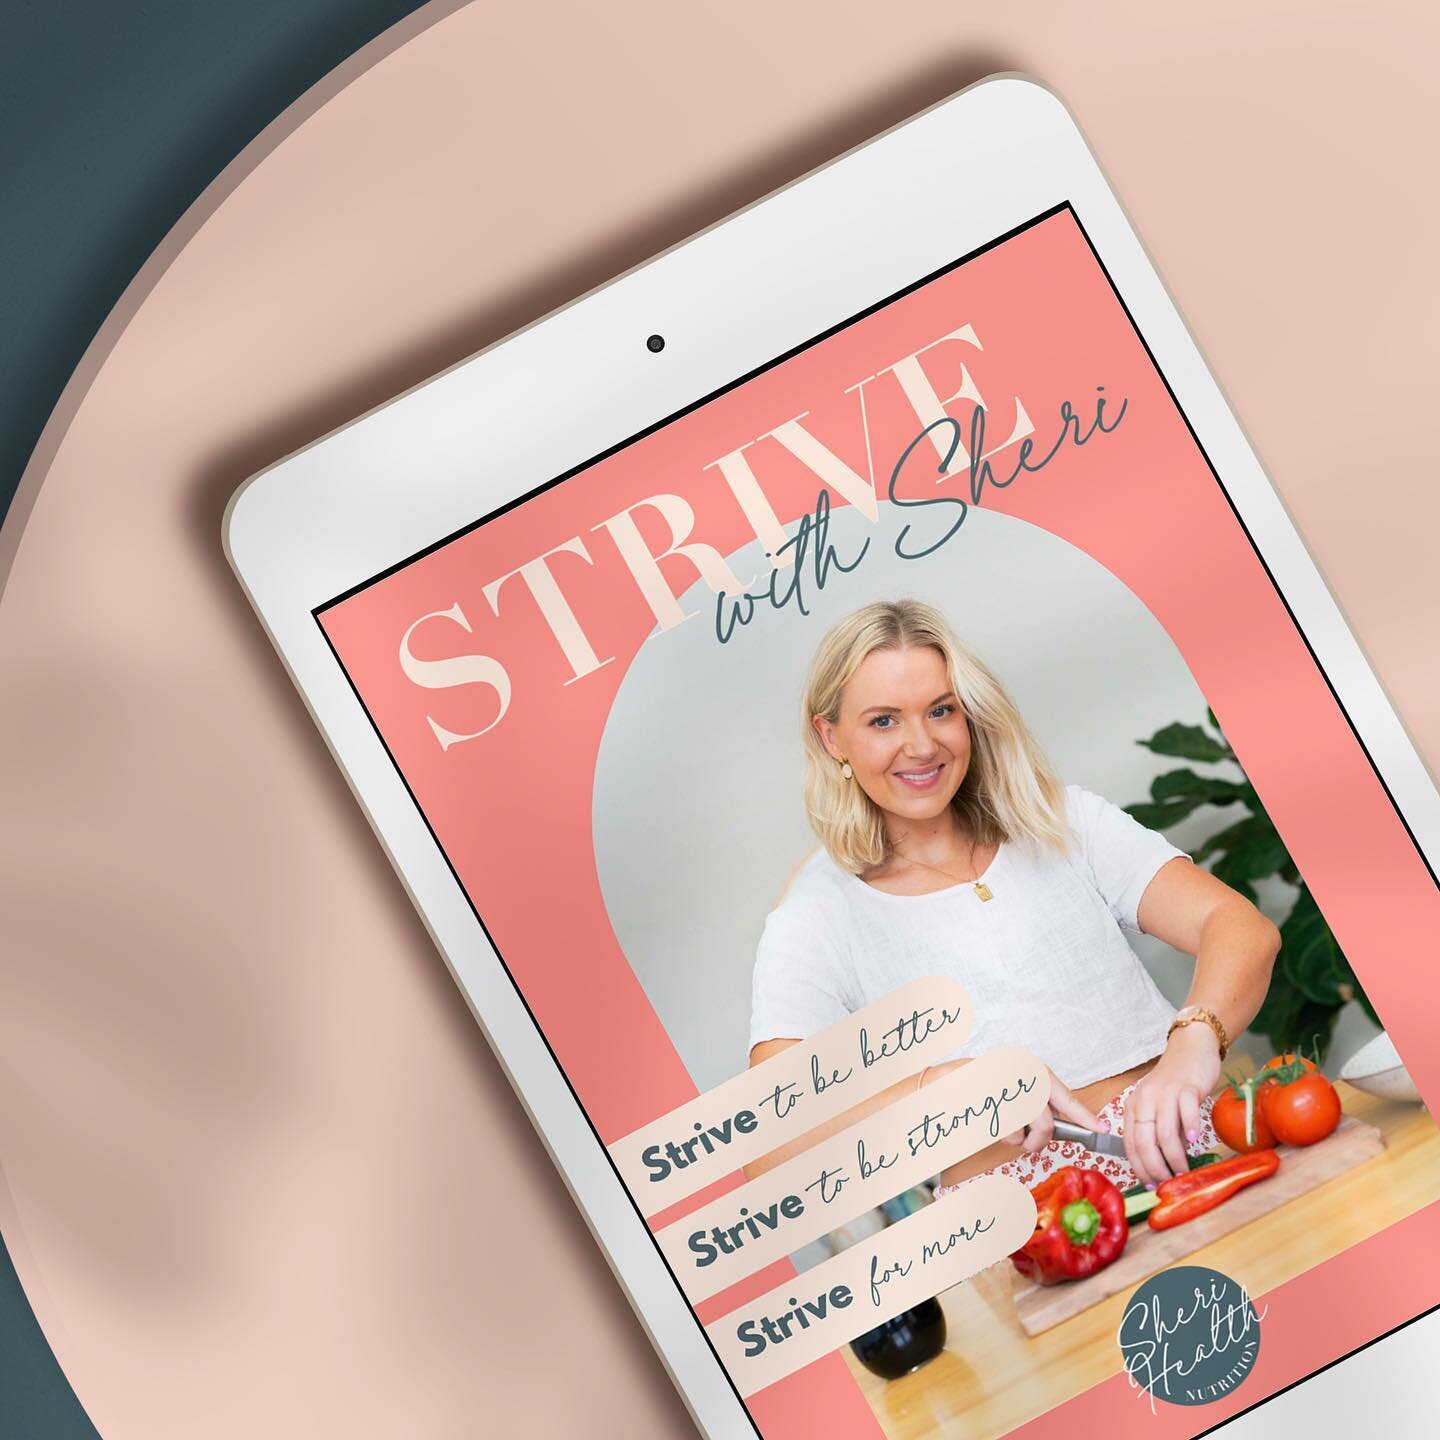 Absolutely loved working with @sherihealth on her Strive Program assets! We developed a new eBook and some social graphics to promote her upcoming launch. I love what Sheri and her Strive Program stands for - &lsquo;more balance, less bullsh*t&rsquo;